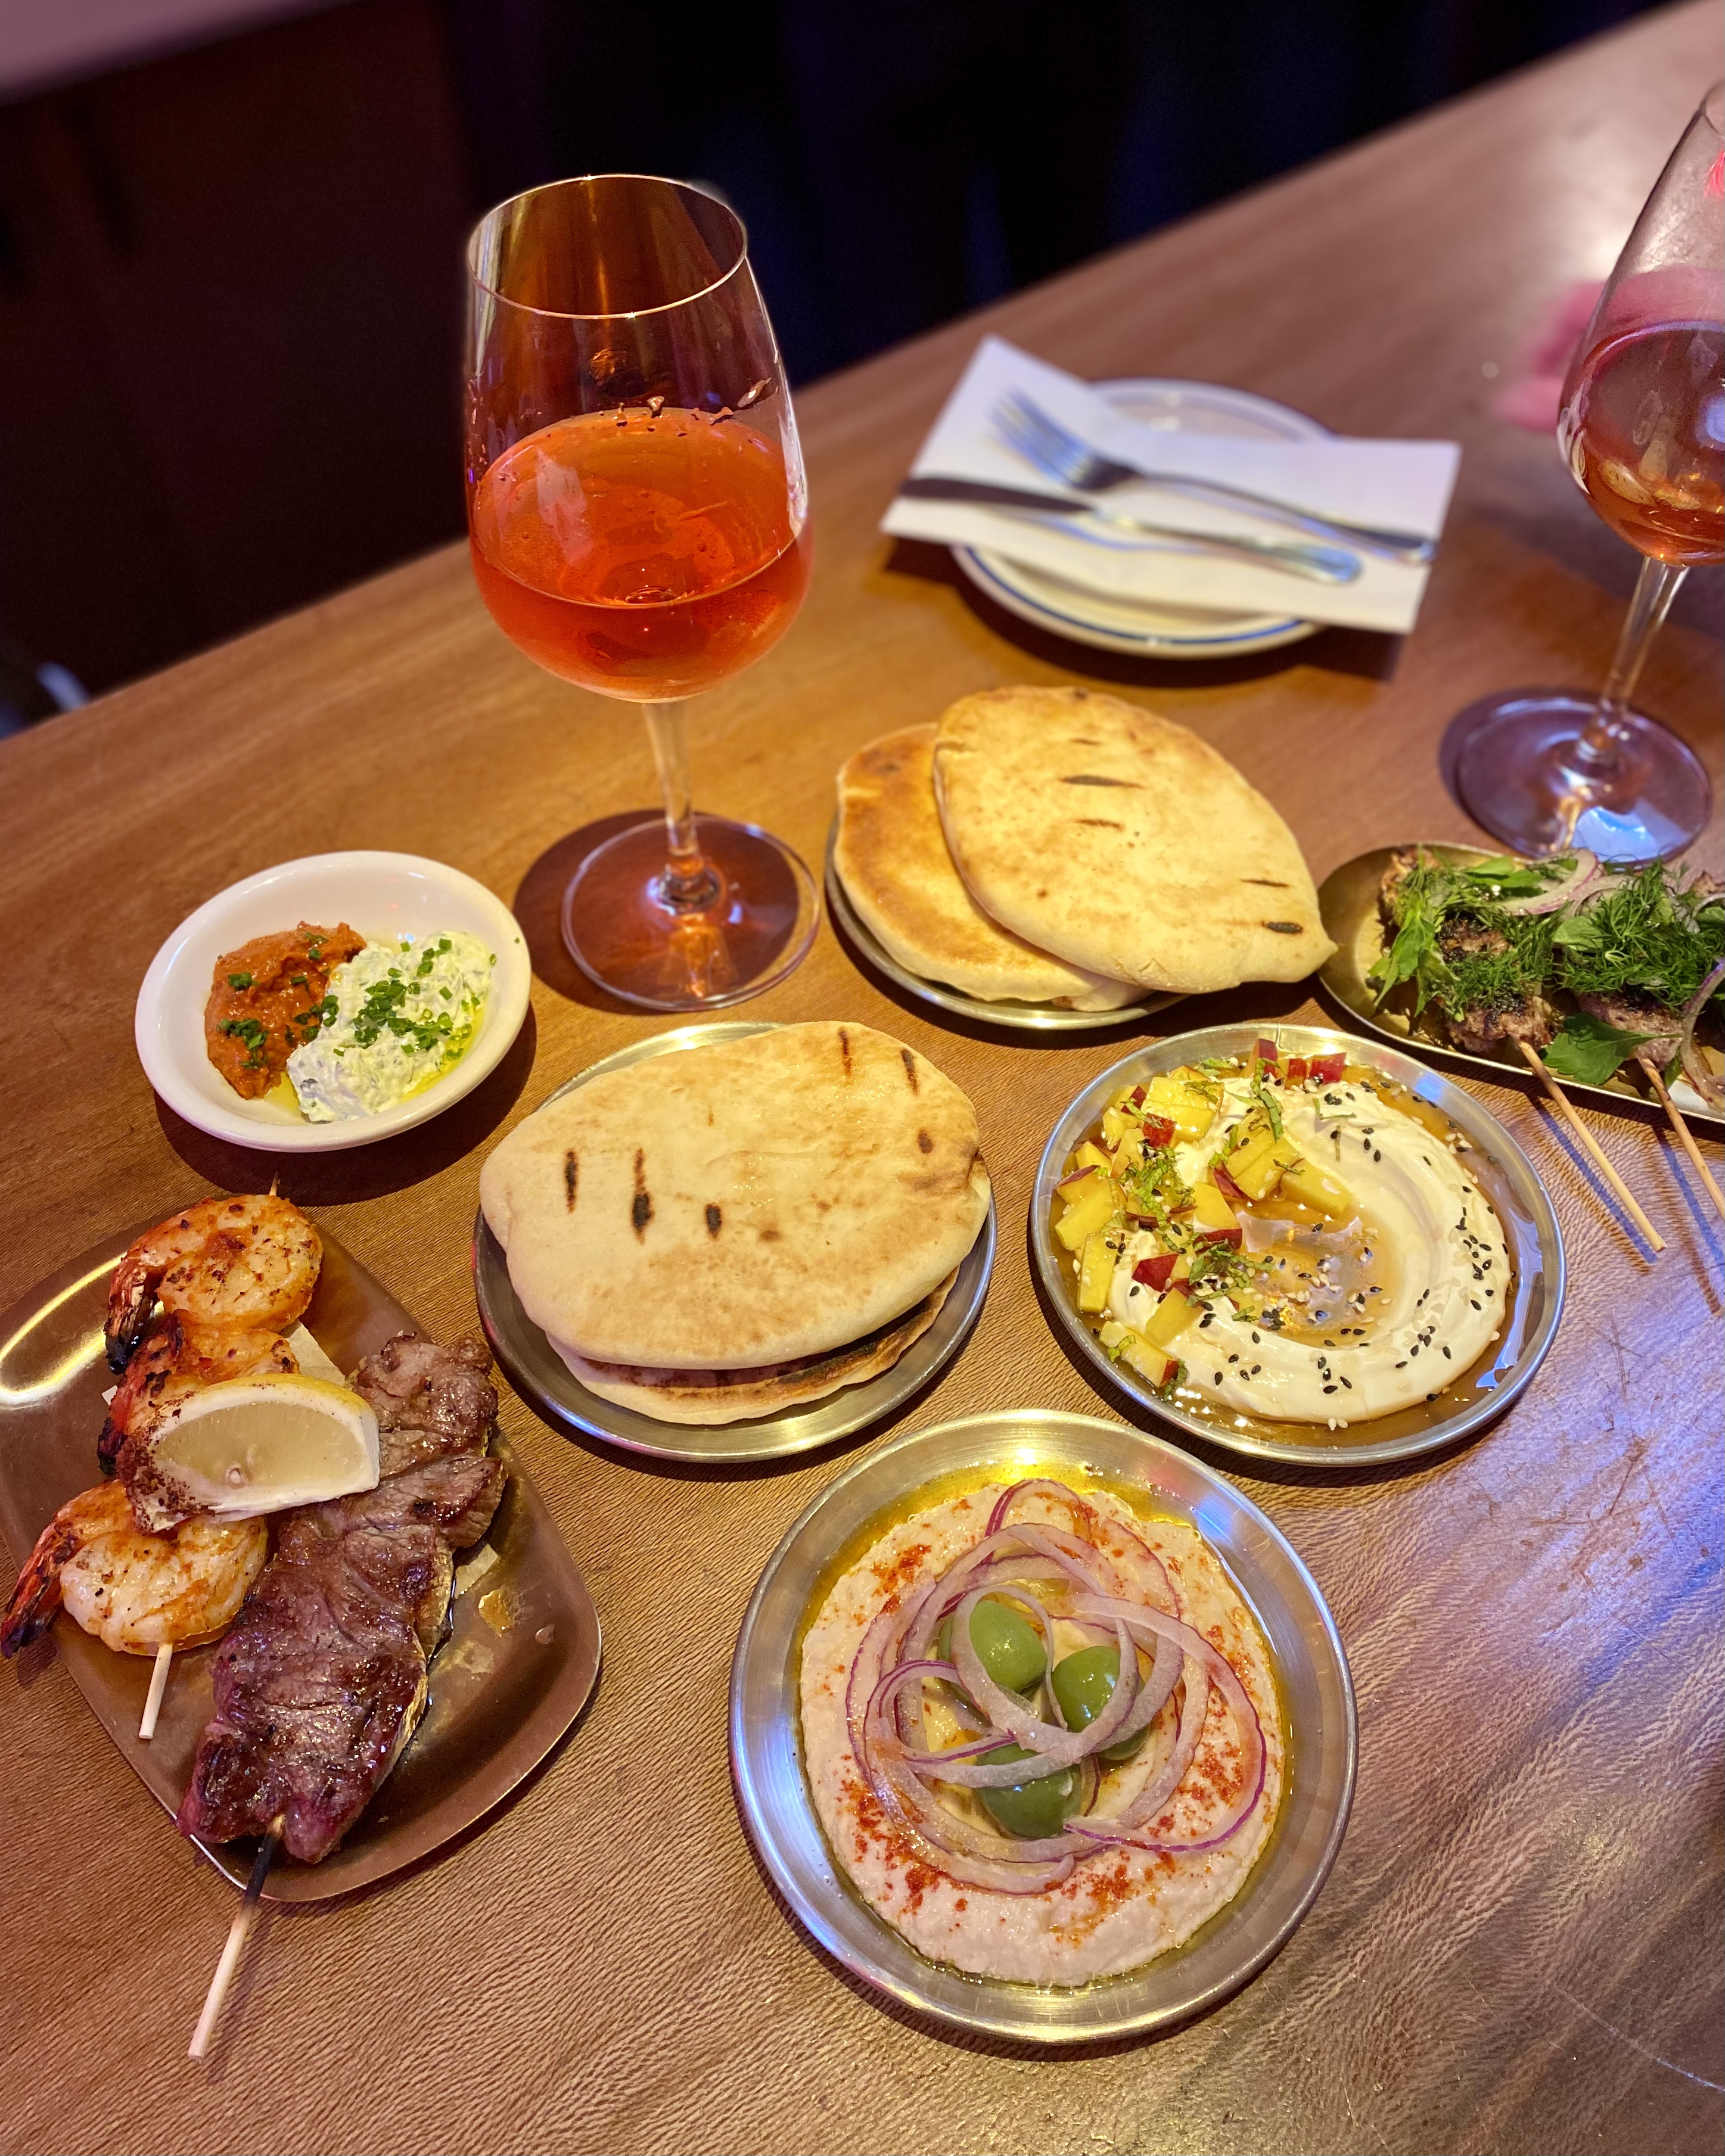 A selection of small plates on a wooden bar with two glasses of red wine.